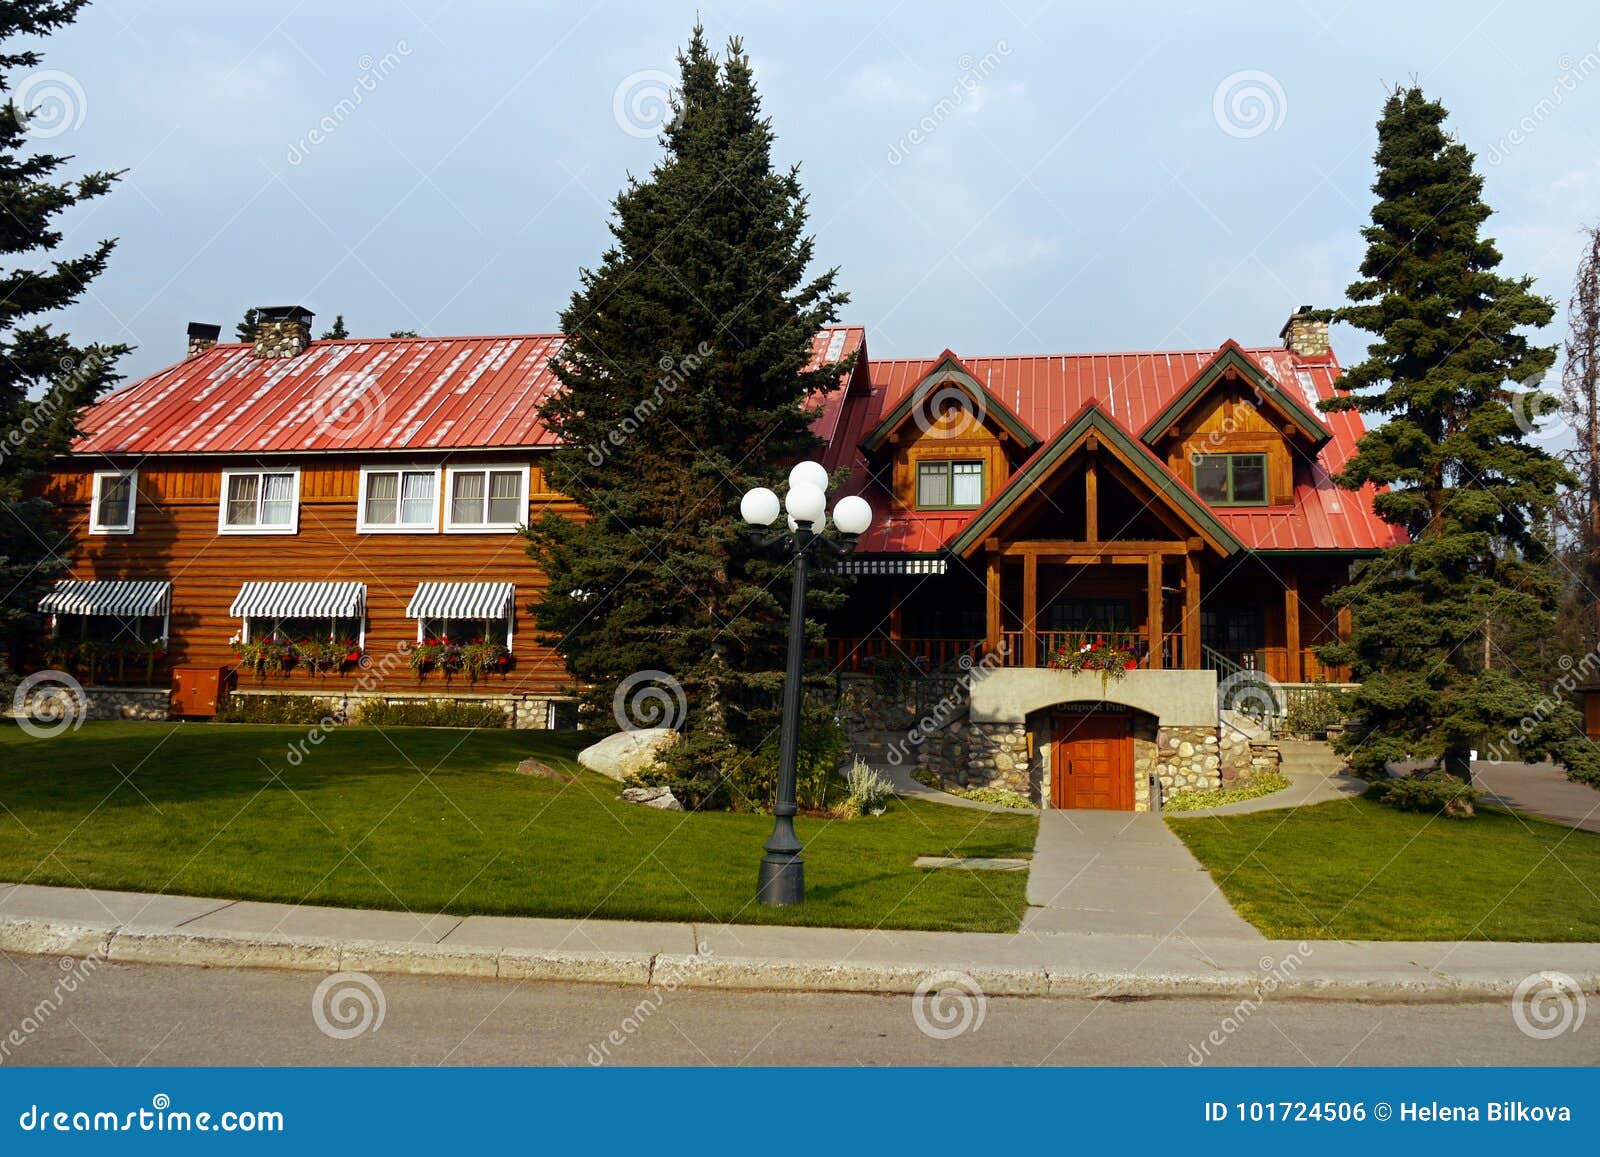 Post Hotel, Lake Louise, Canadian Rockies Editorial Photo - Image of holidays, america: 101724506